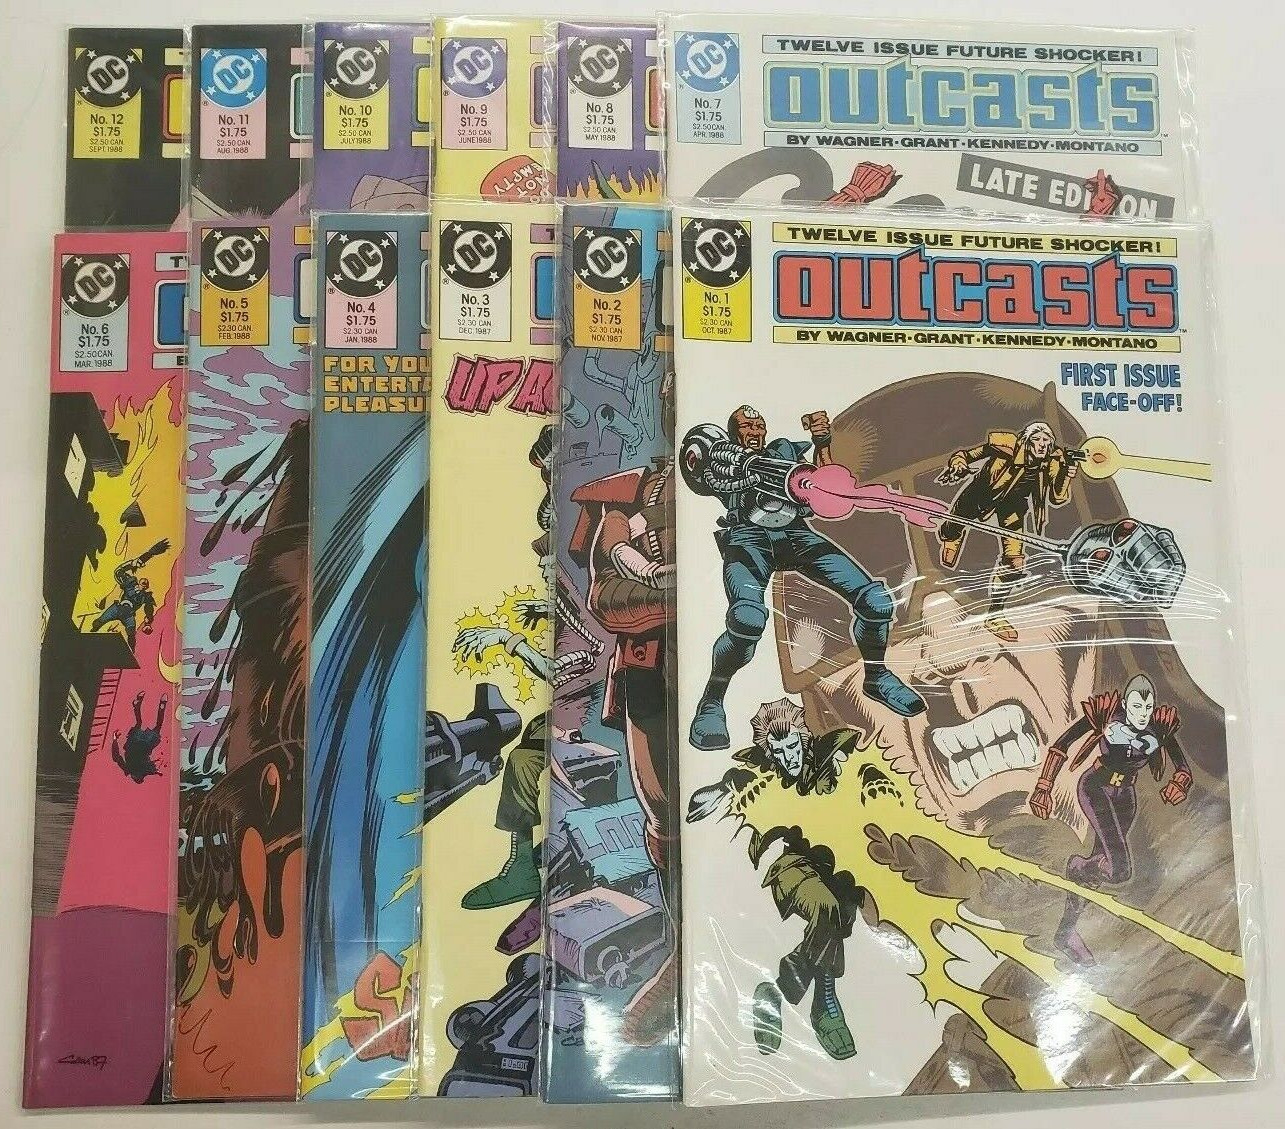 OUTCASTS #1-12 COMPLETE SET ~ VF-NM 1987 DC COMICS ~ WAGNER KENNEDY MONTANO